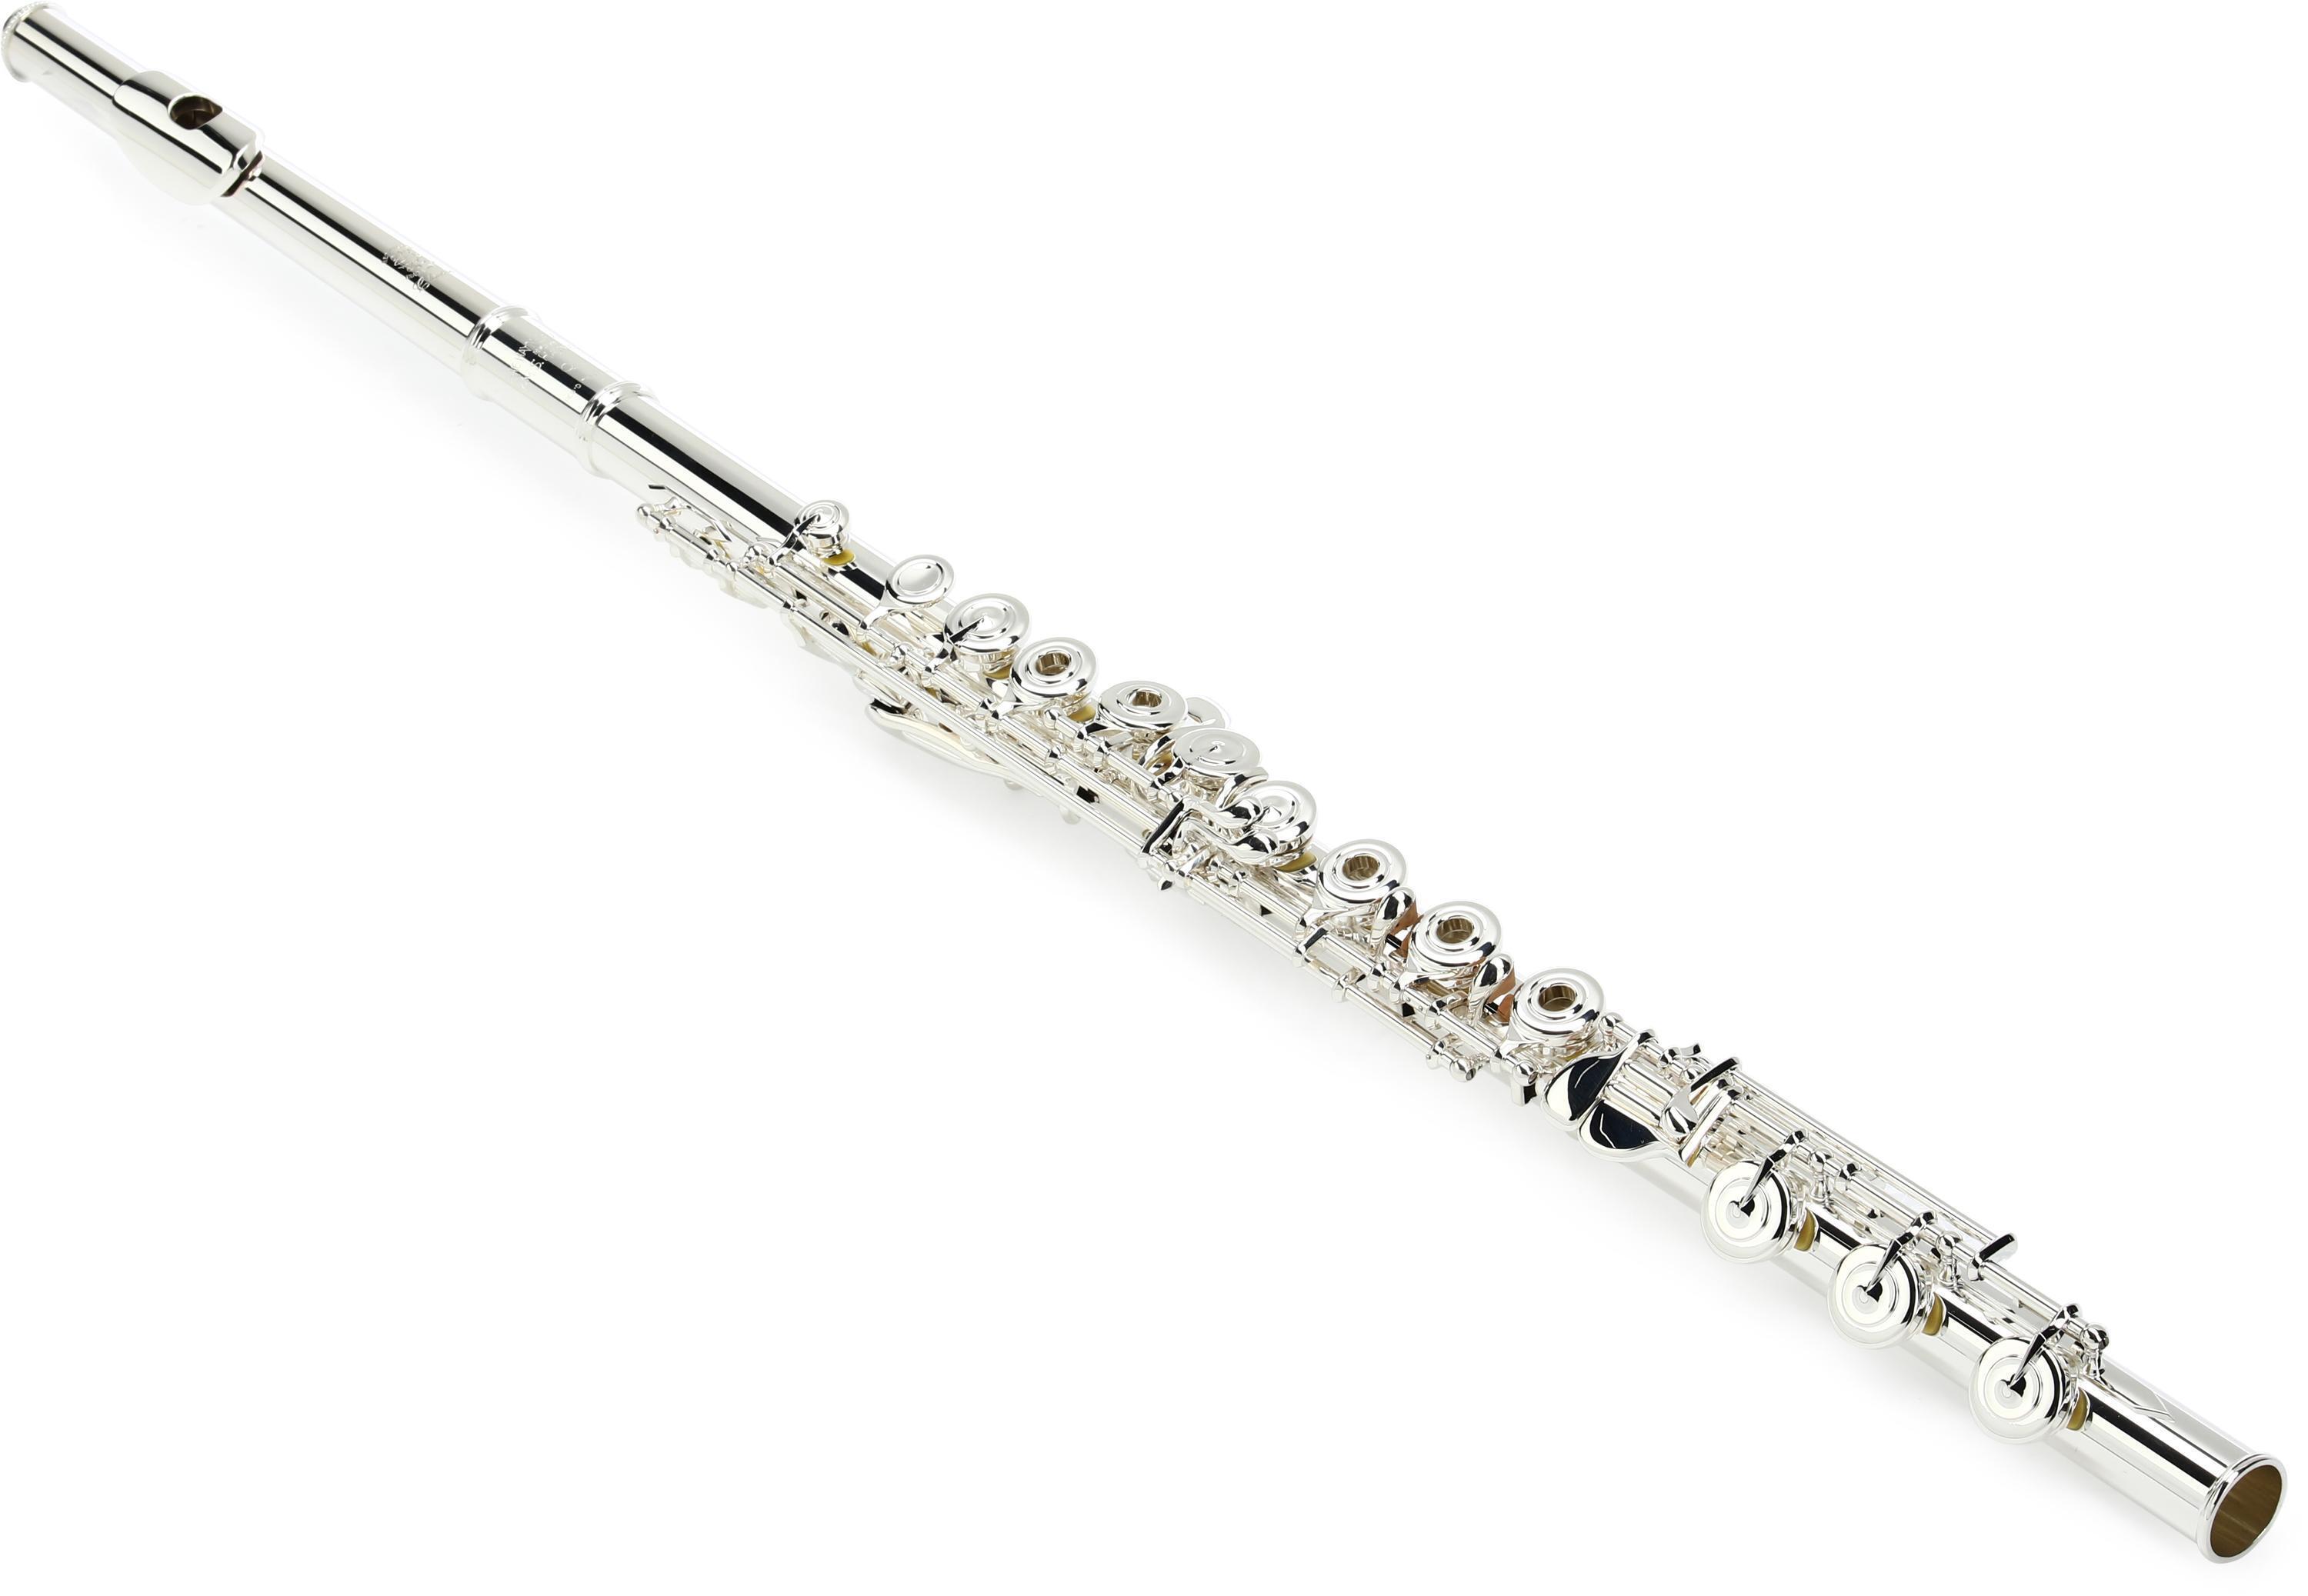 Wm. S. Haynes Q1 Intermediate Flute with Offset G Key System, C# Trill Key,  and Split E Mechanism Sweetwater